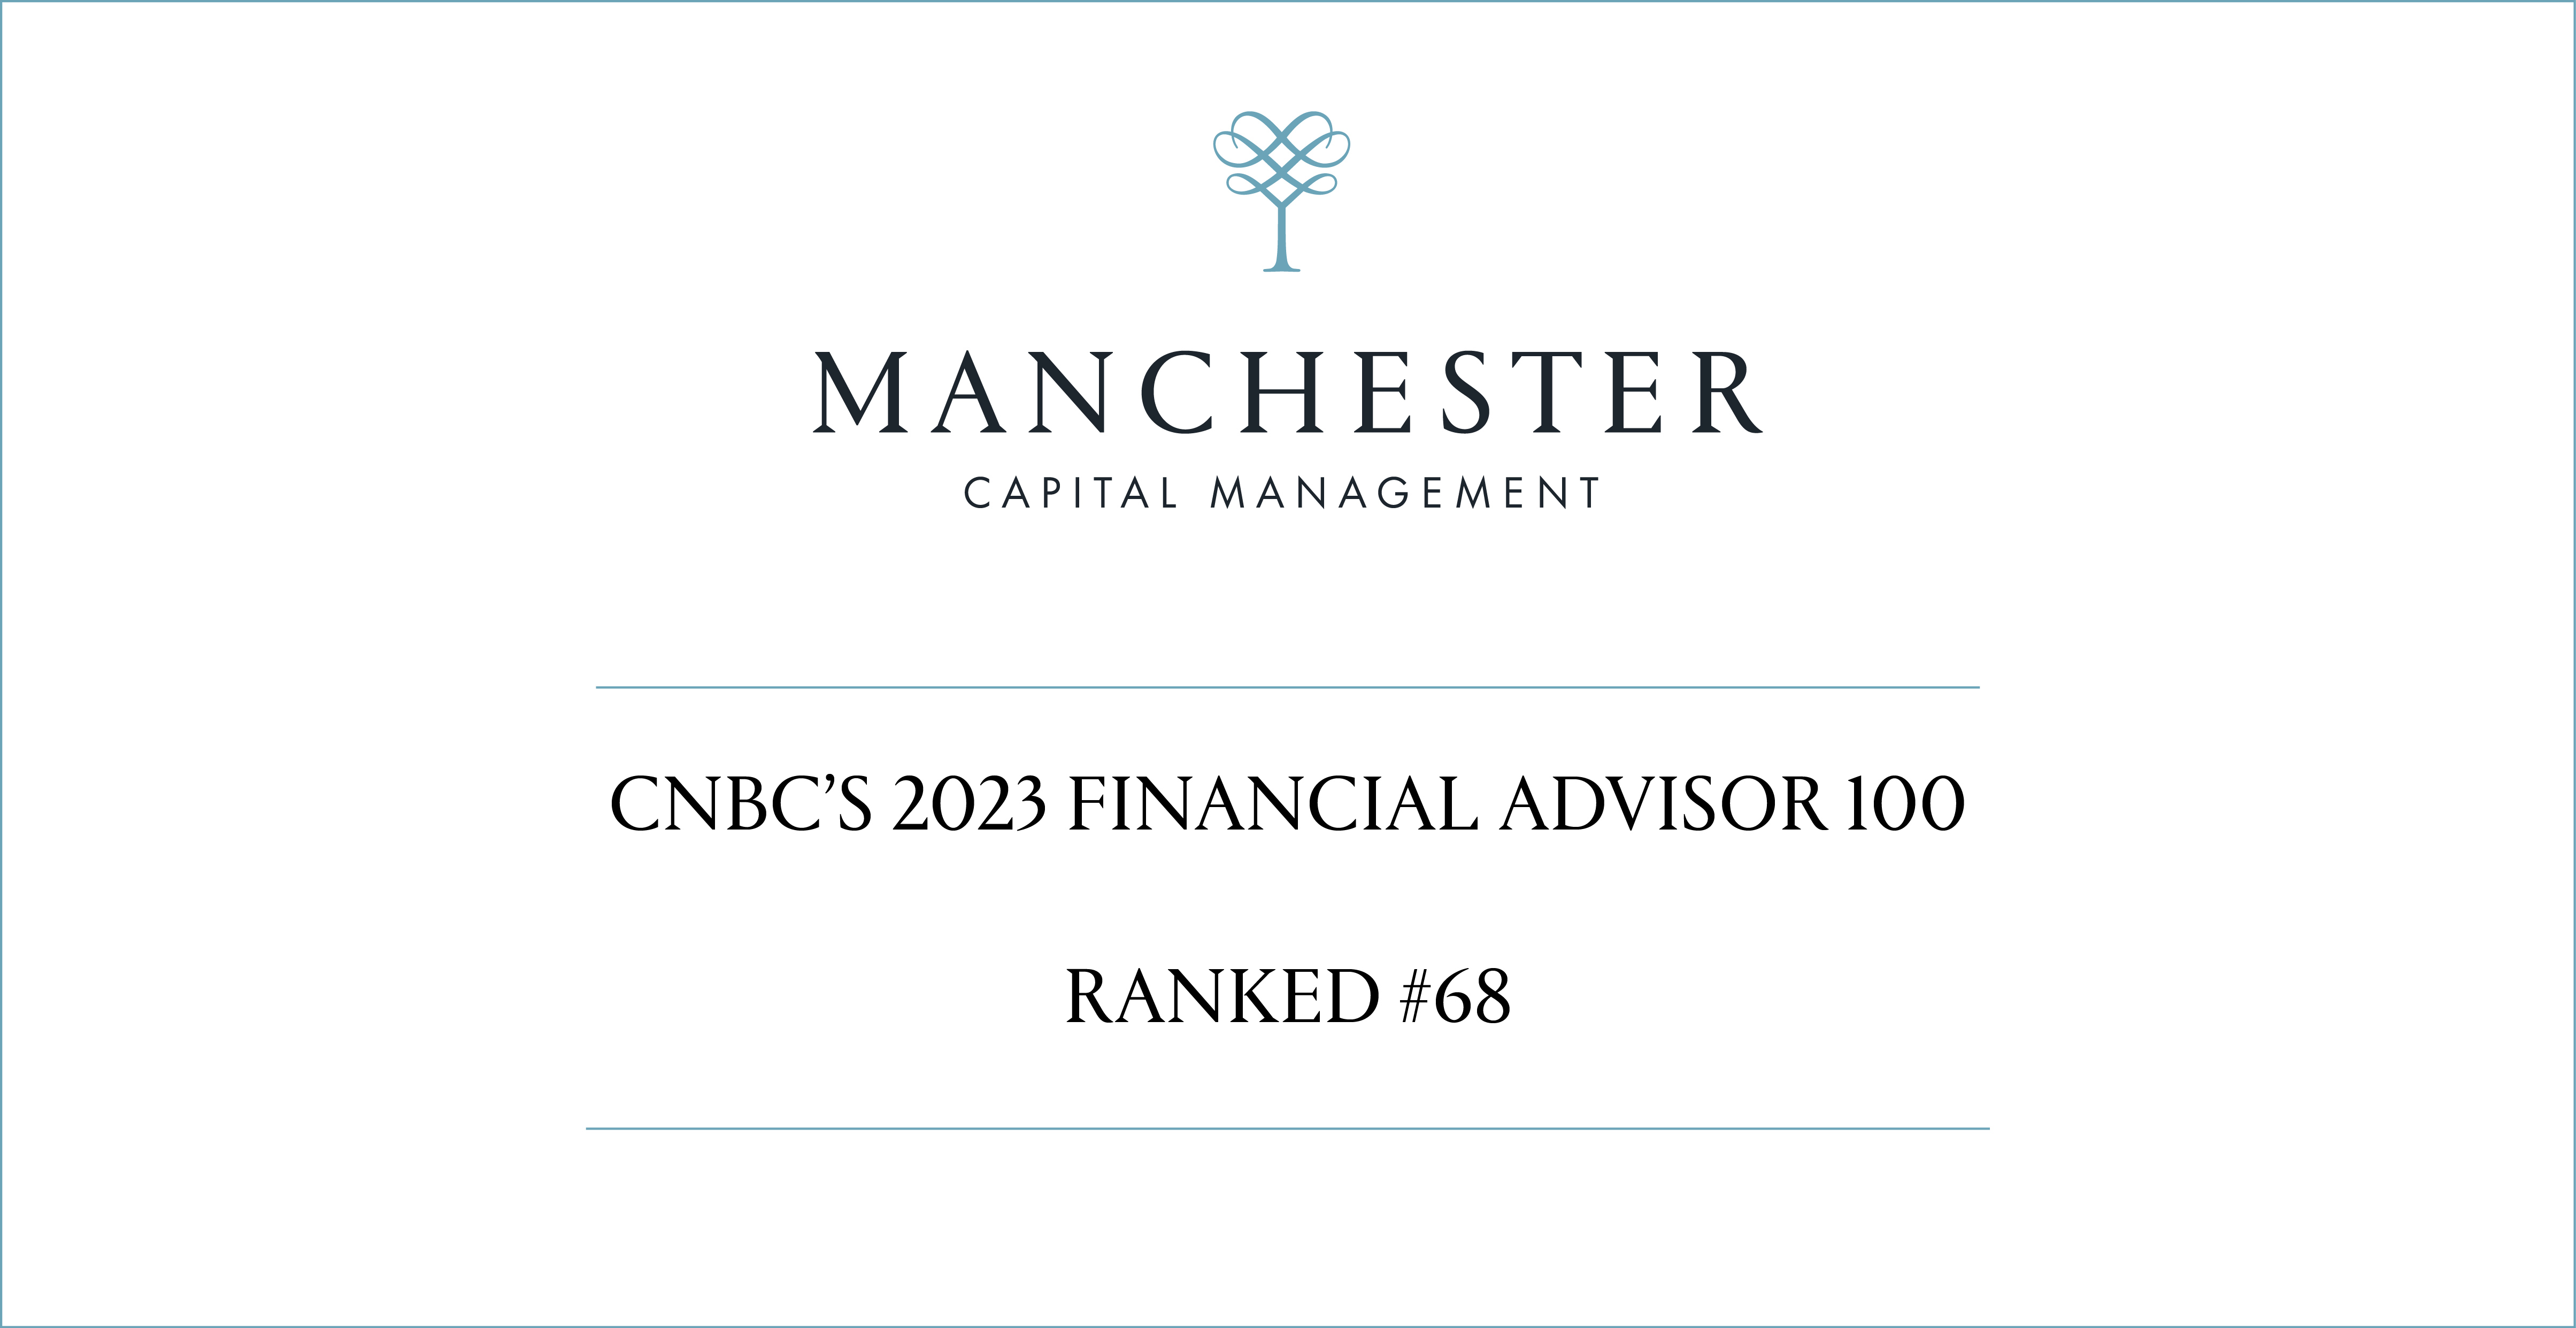 Manchester Capital Management named on CNBC Financial Advisor 100